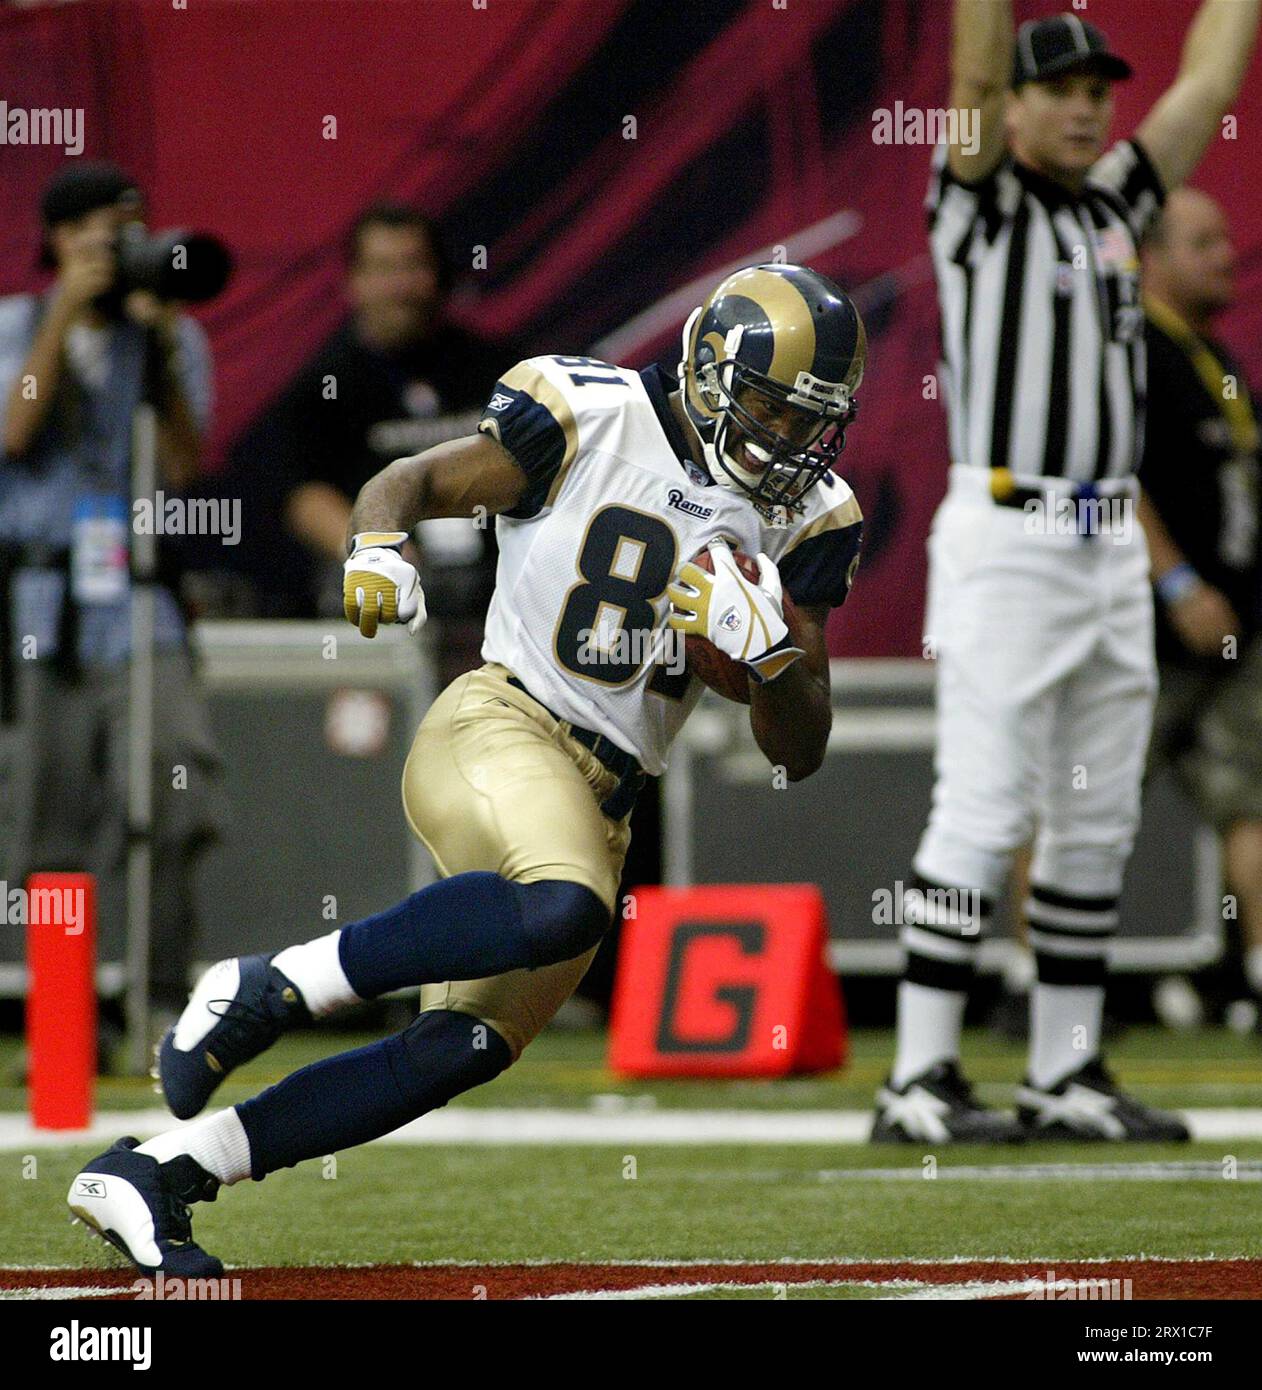 Atlanta, USA. 19th Sep, 2004. St. Louis Rams wide receiver Torry Holt (81) hauls in a 33-yard touchdown pass during second half action against the Atlanta Falcons at the Georgia Dome in Atlanta on Sunday, Sept. 19, 2004. (Photo by Gabriel B. Tait/St. Louis Post-Dispatch/TNS/Sipa USA) Credit: Sipa USA/Alamy Live News Stock Photo